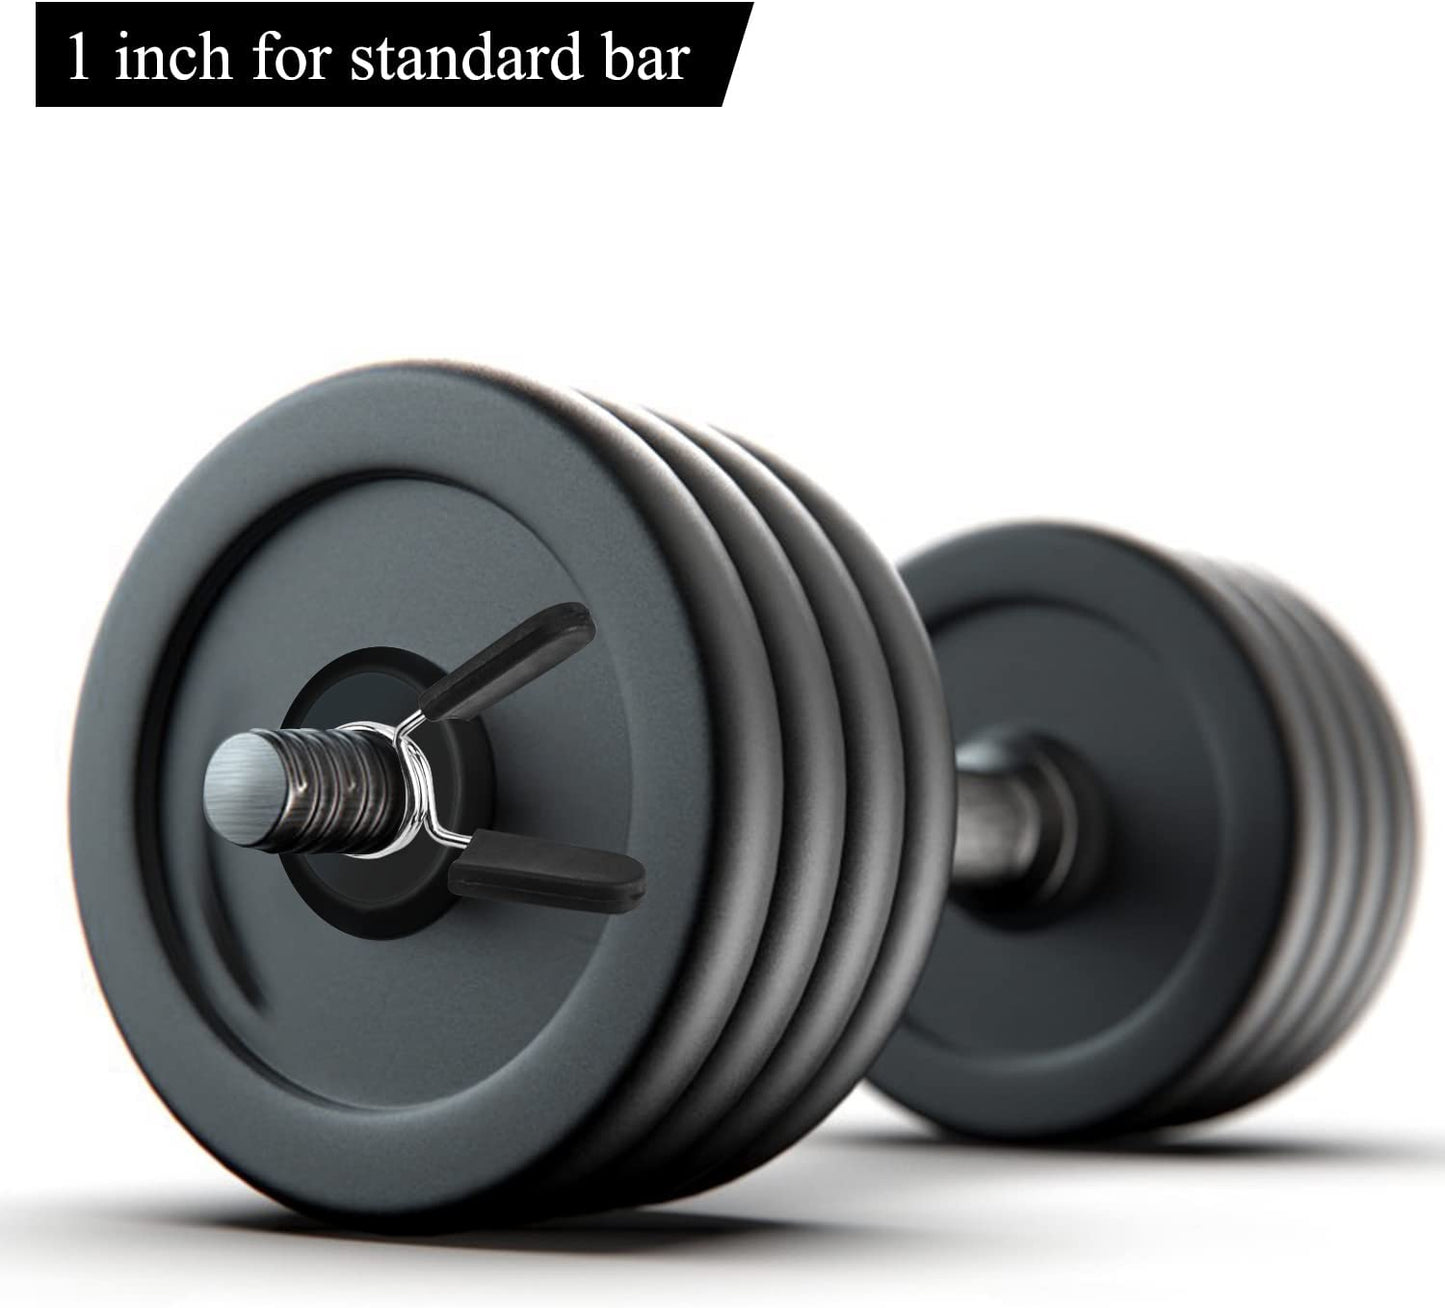 Barbell Clamps Dumbbell Spring Clip Circlip Collars 1 Inch Weight Bars Clips Fitness Weightlifting Lock Buckle 1 Inch for Standard Bar Barbell Strength Training Gym Accessory